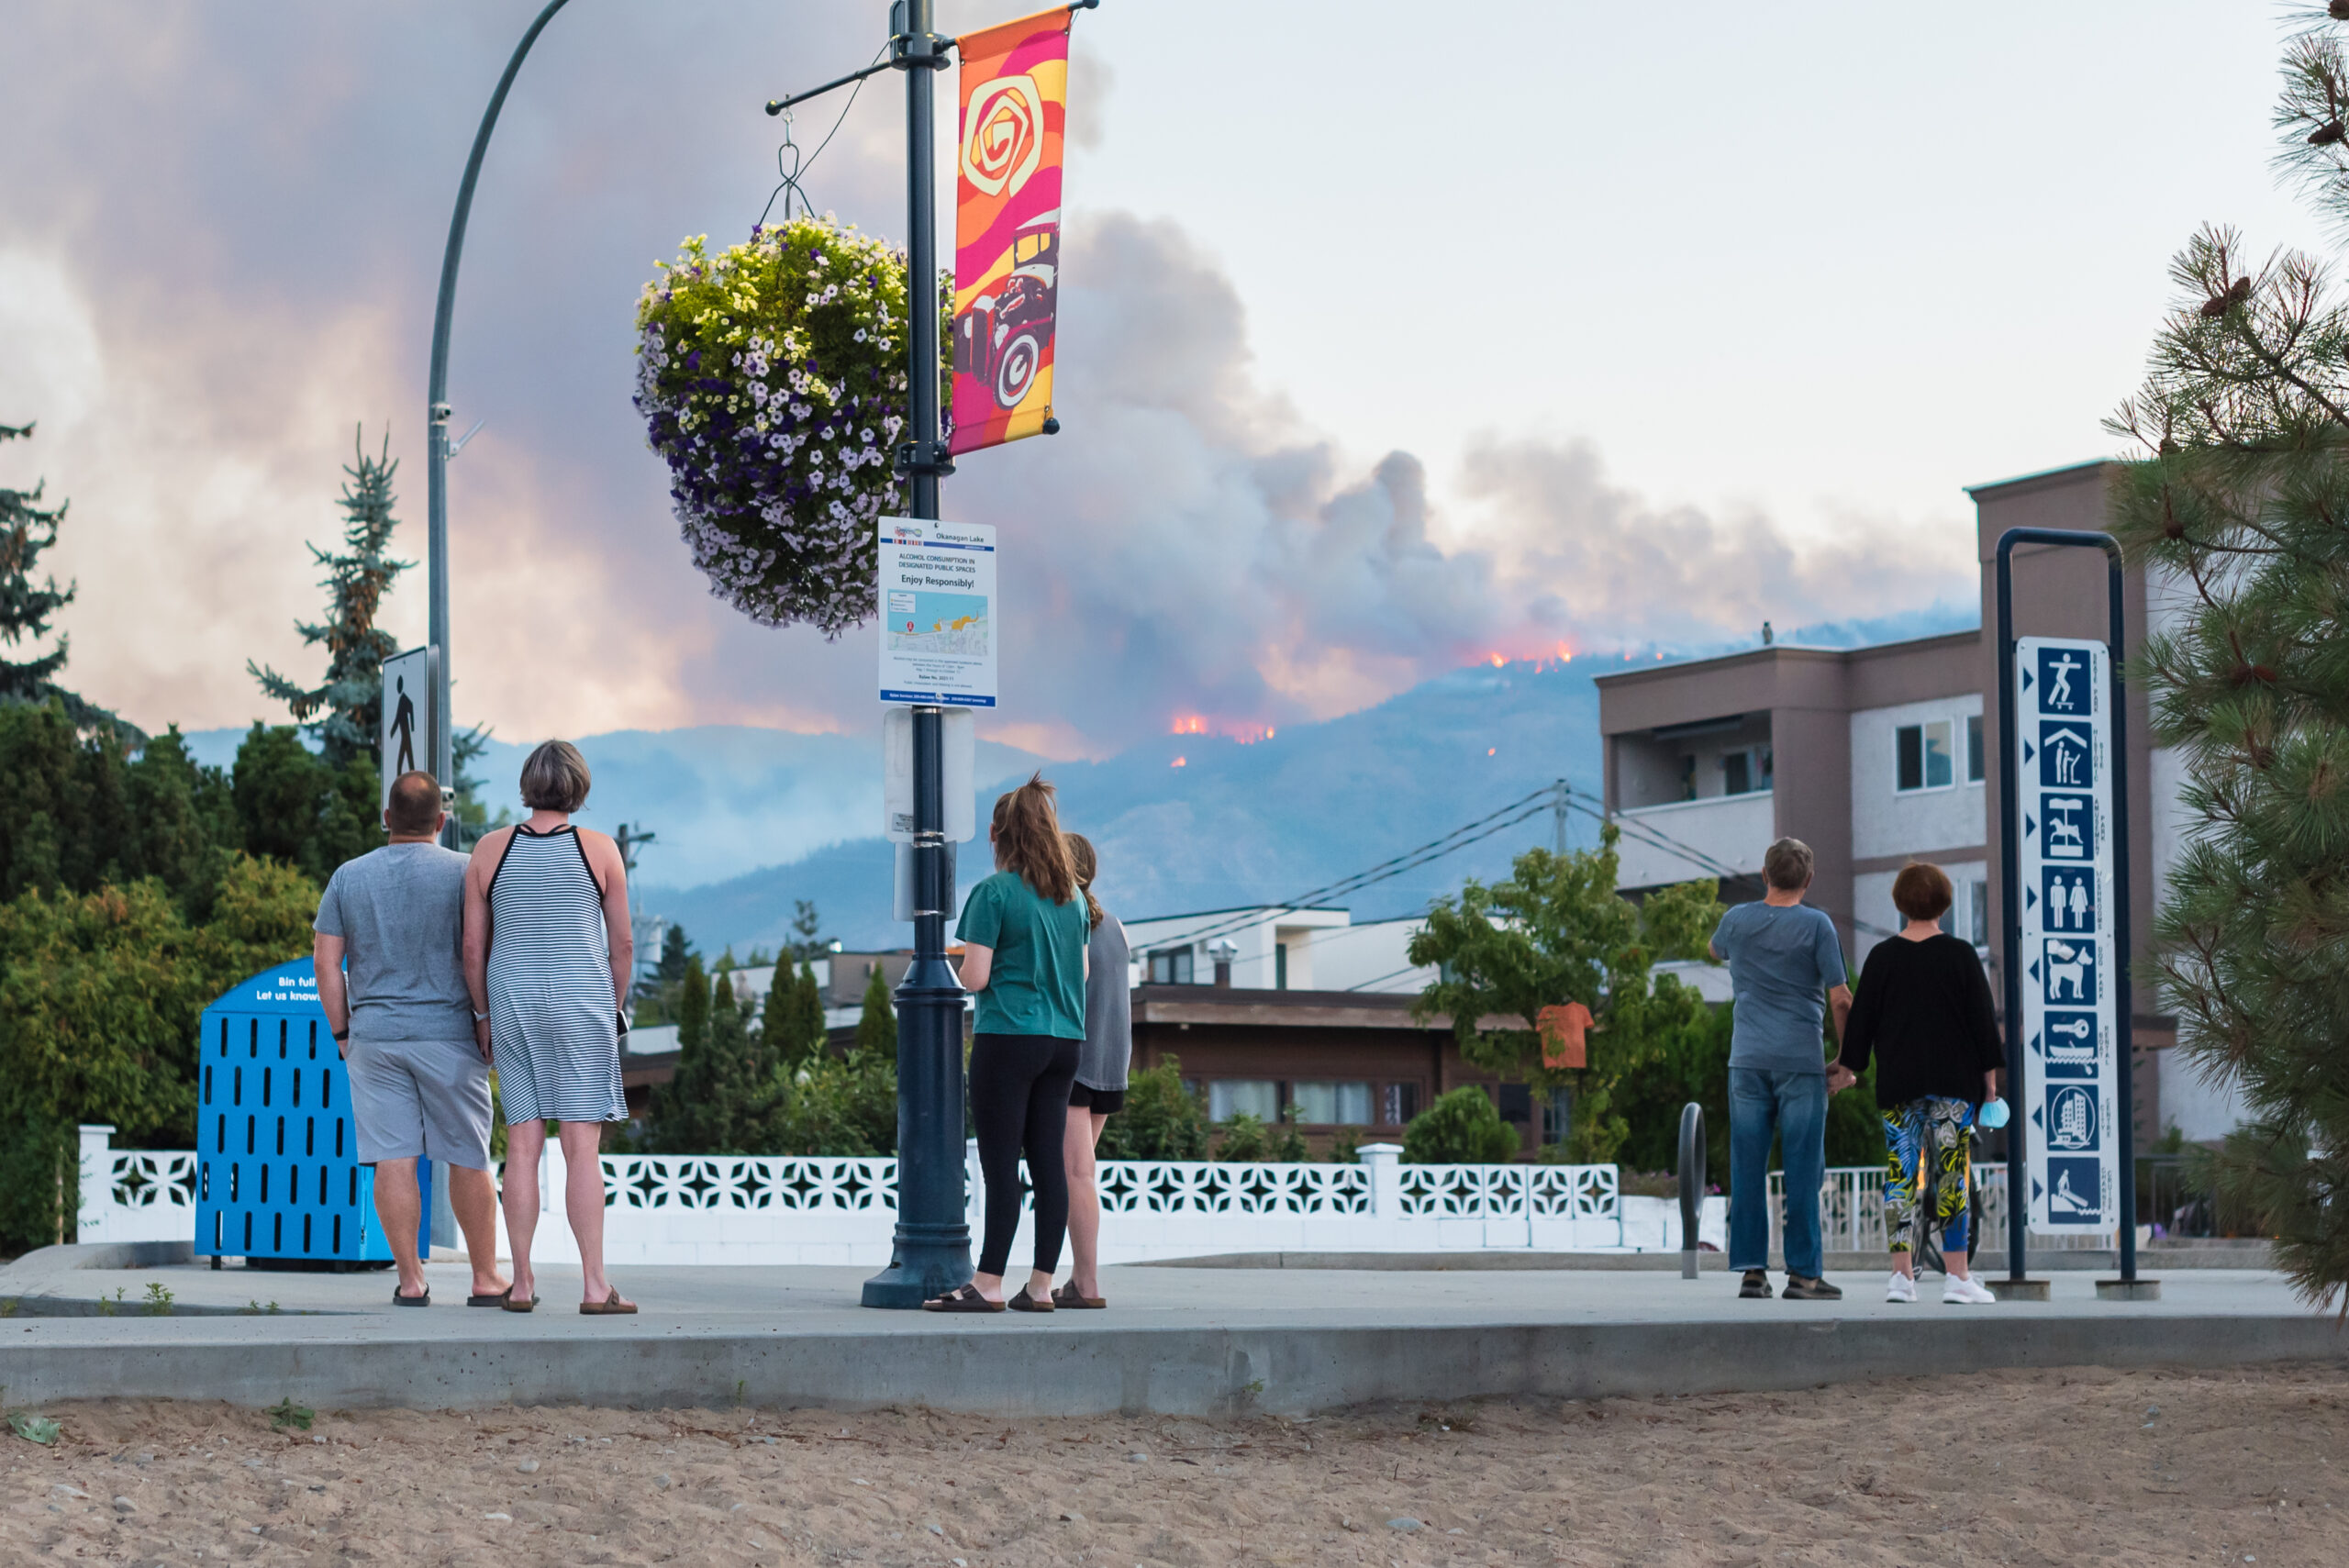 People watching forest fire in hills above city landscape.